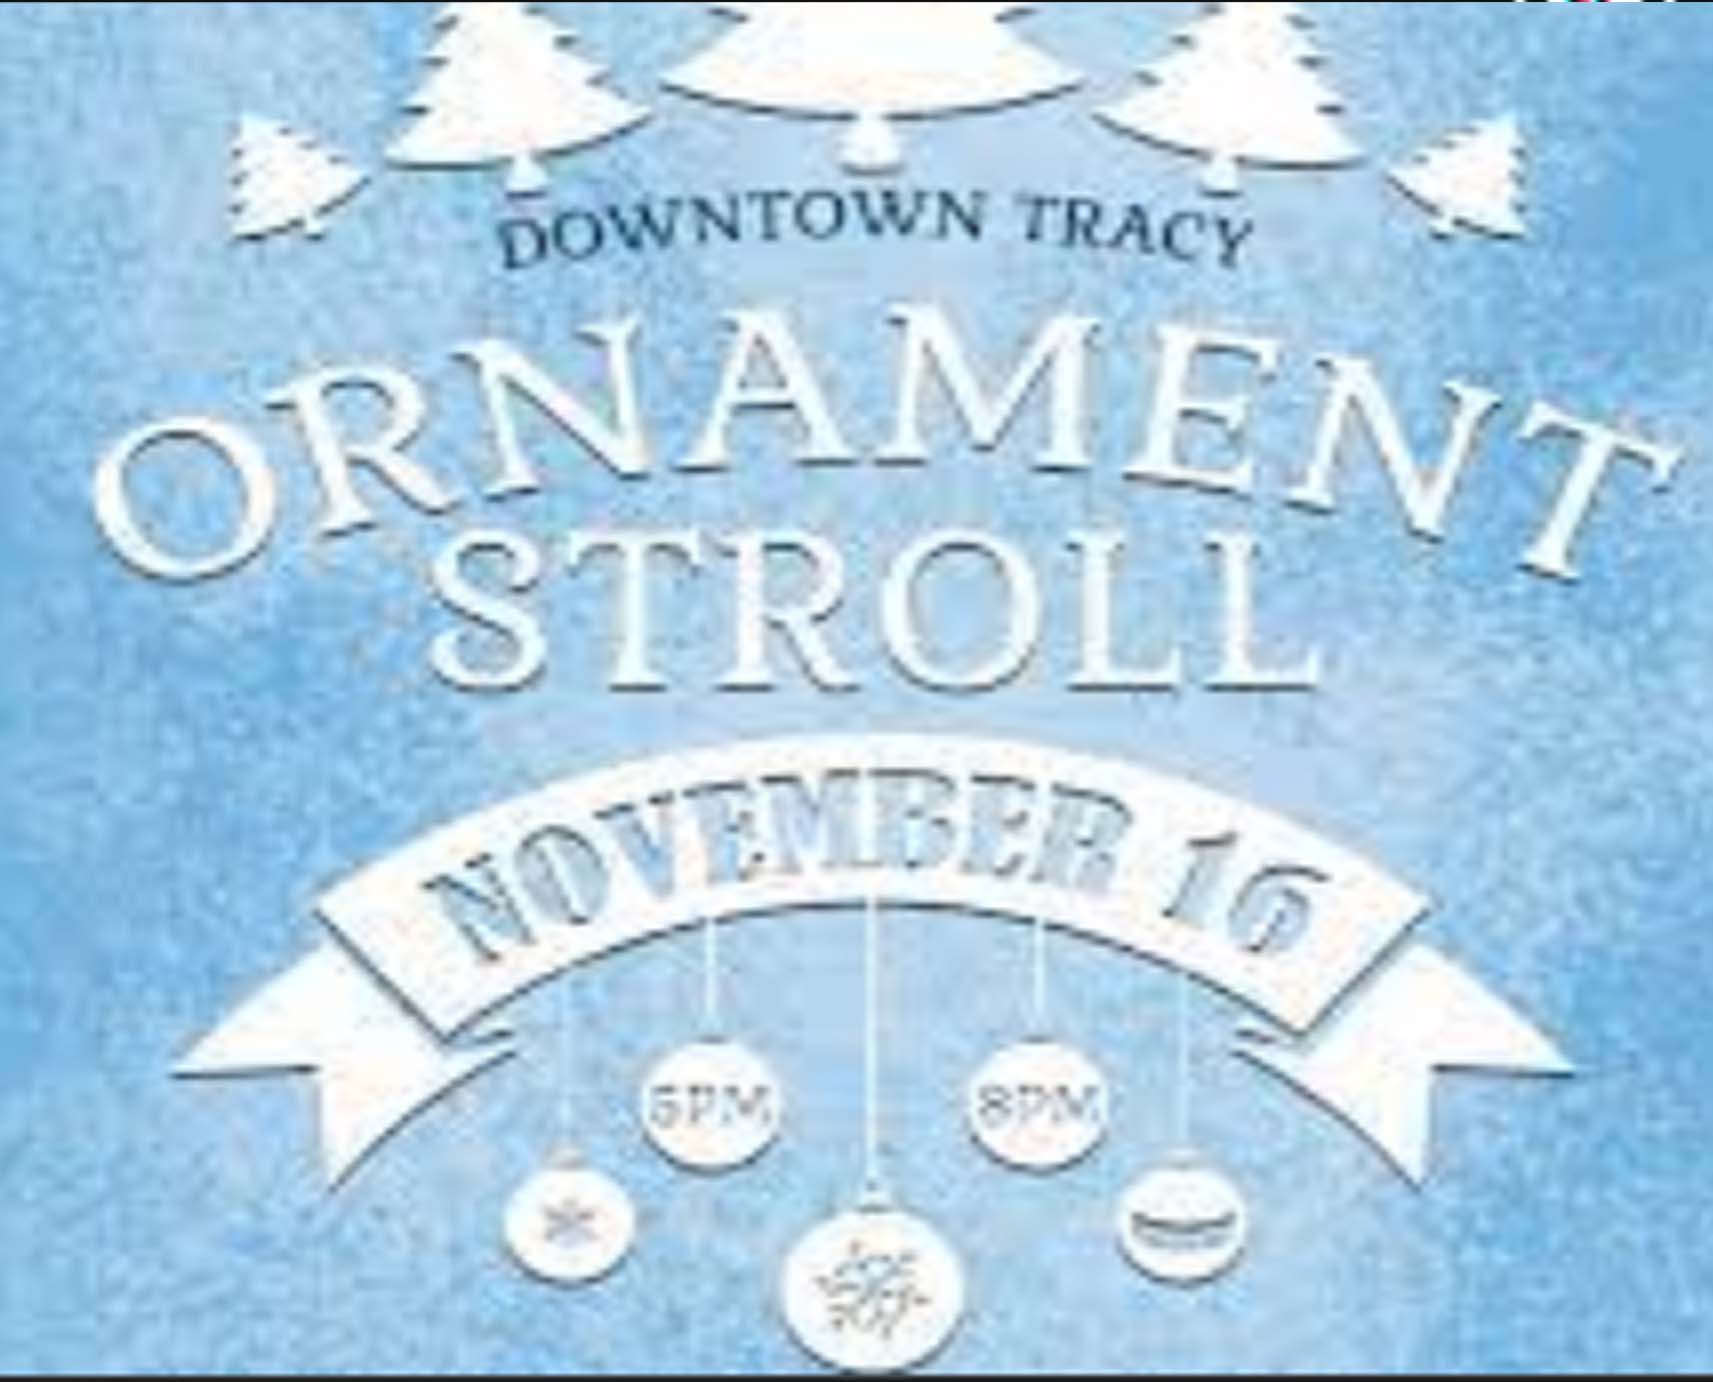 Downtown Tracy Holiday Ornament Stroll - 2022